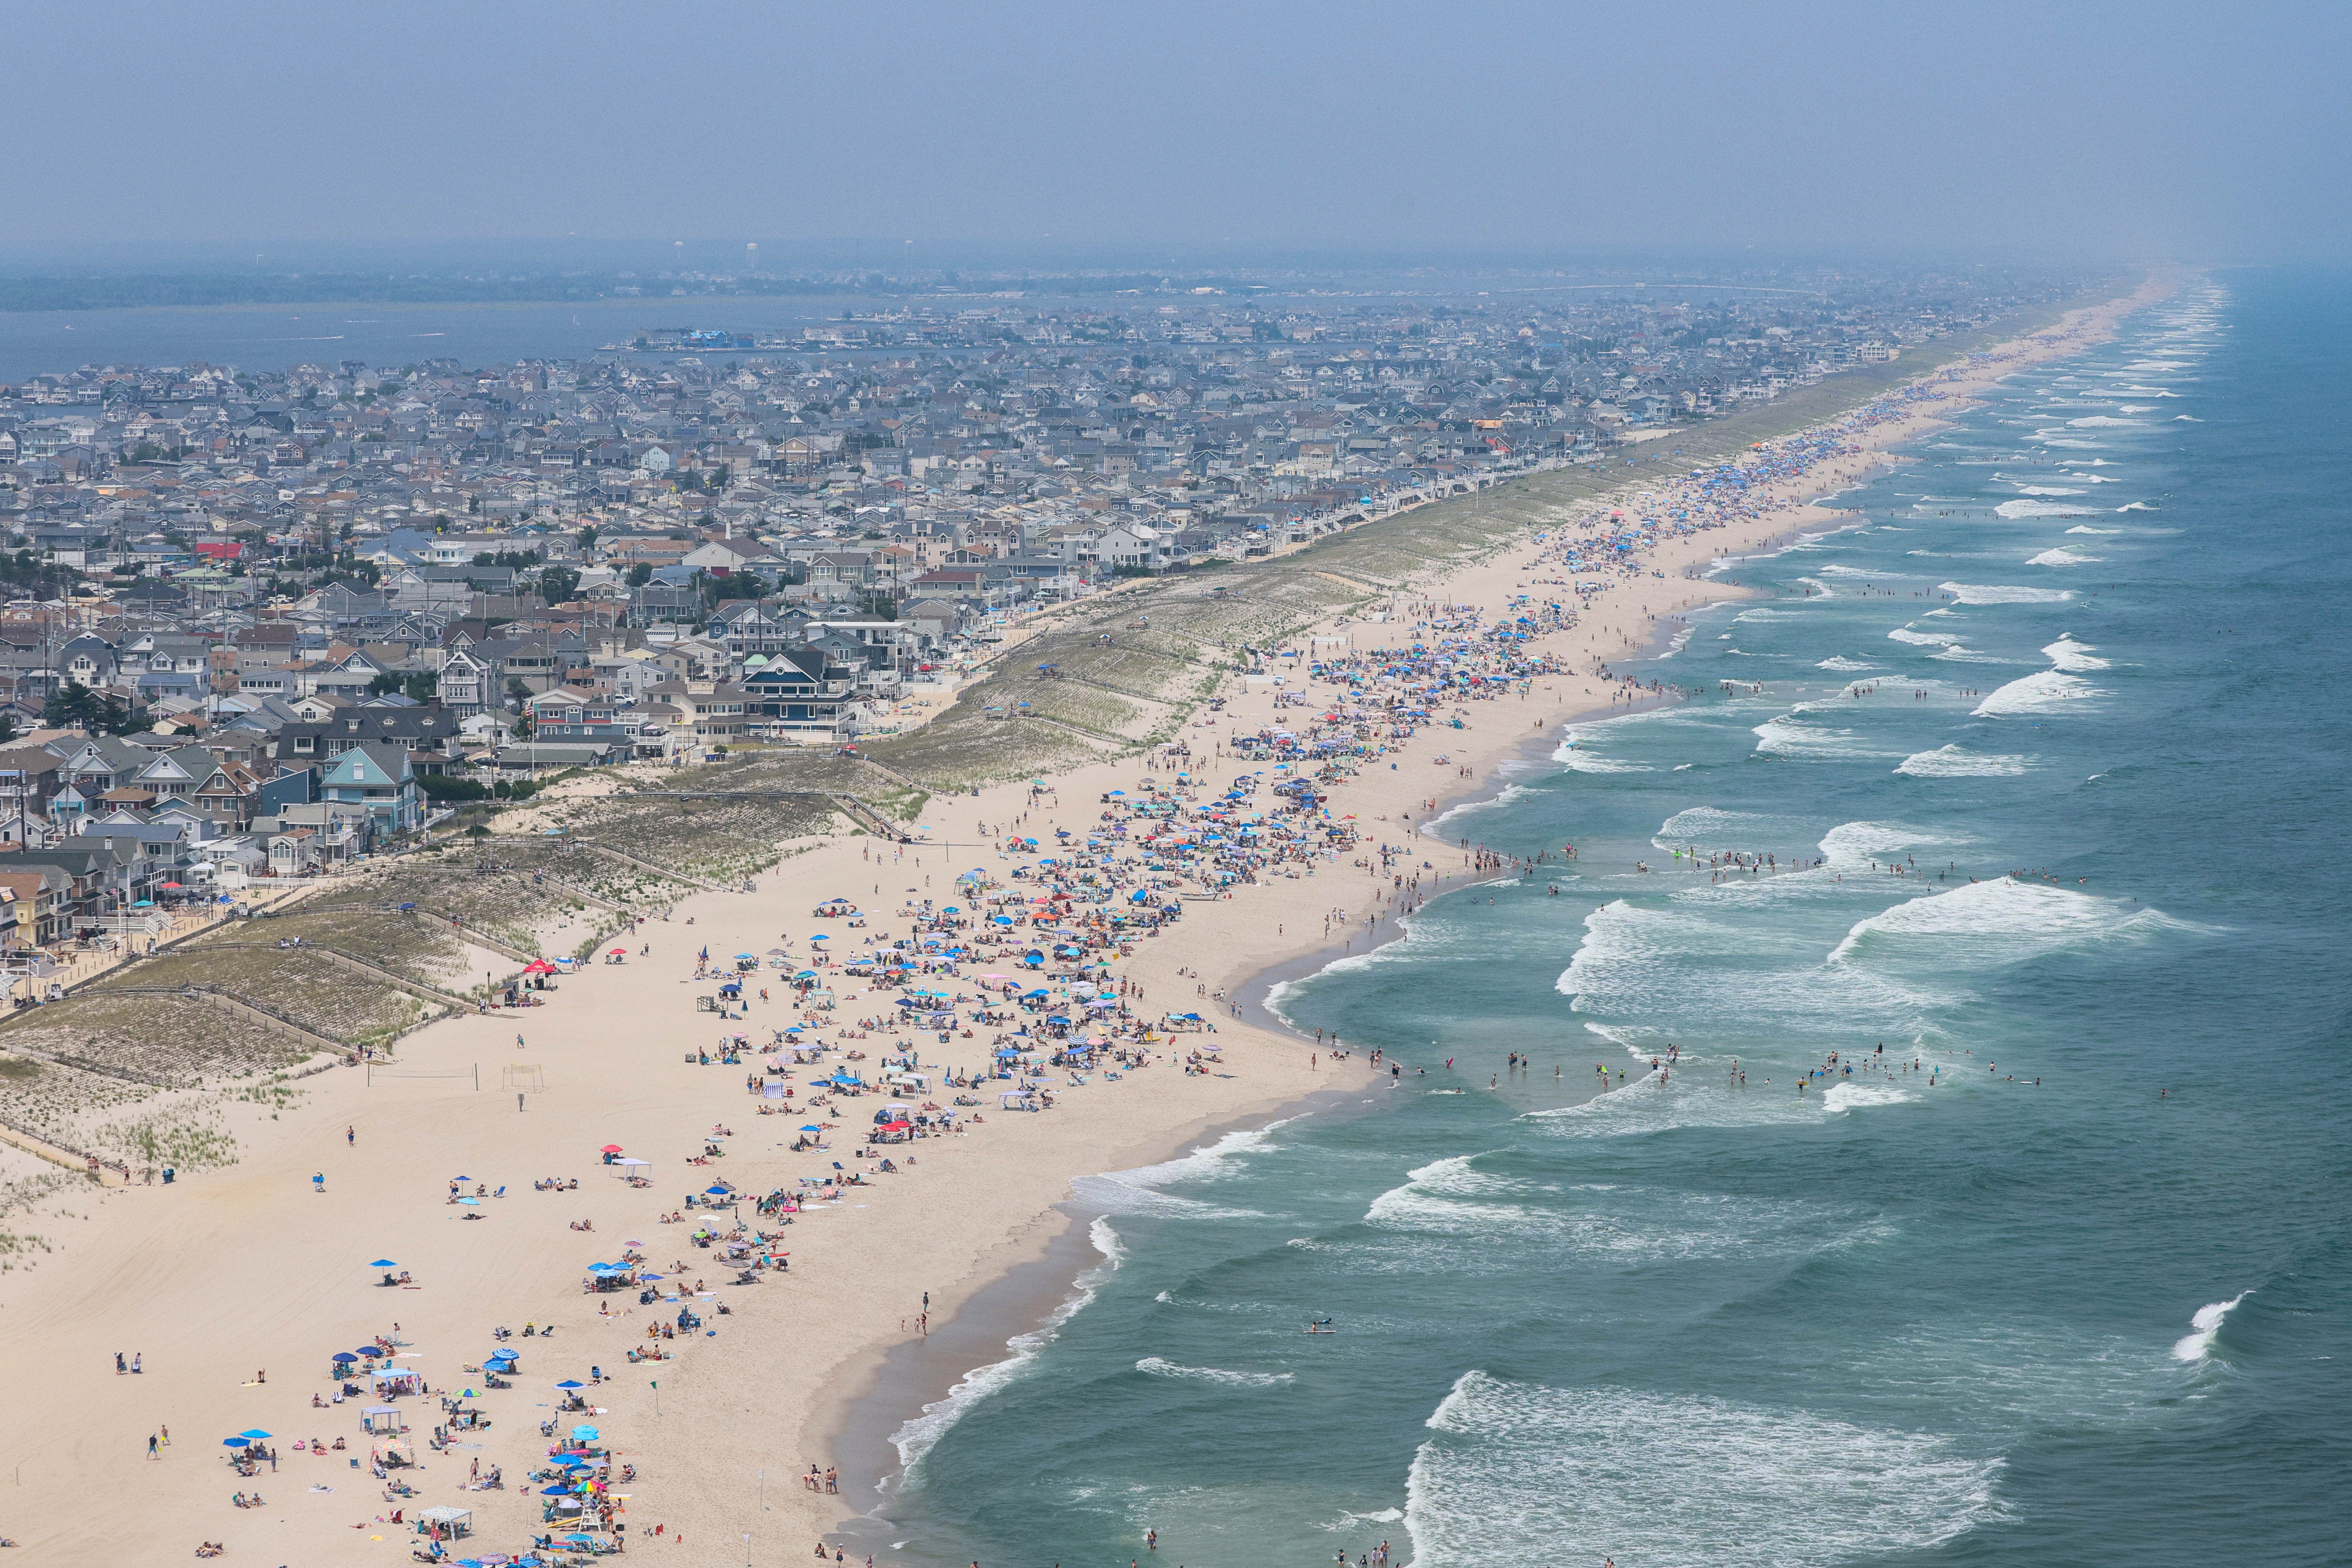 Beachgoers flock to Jersey Shore for long 2023 Fourth of July weekend  (PHOTOS) 